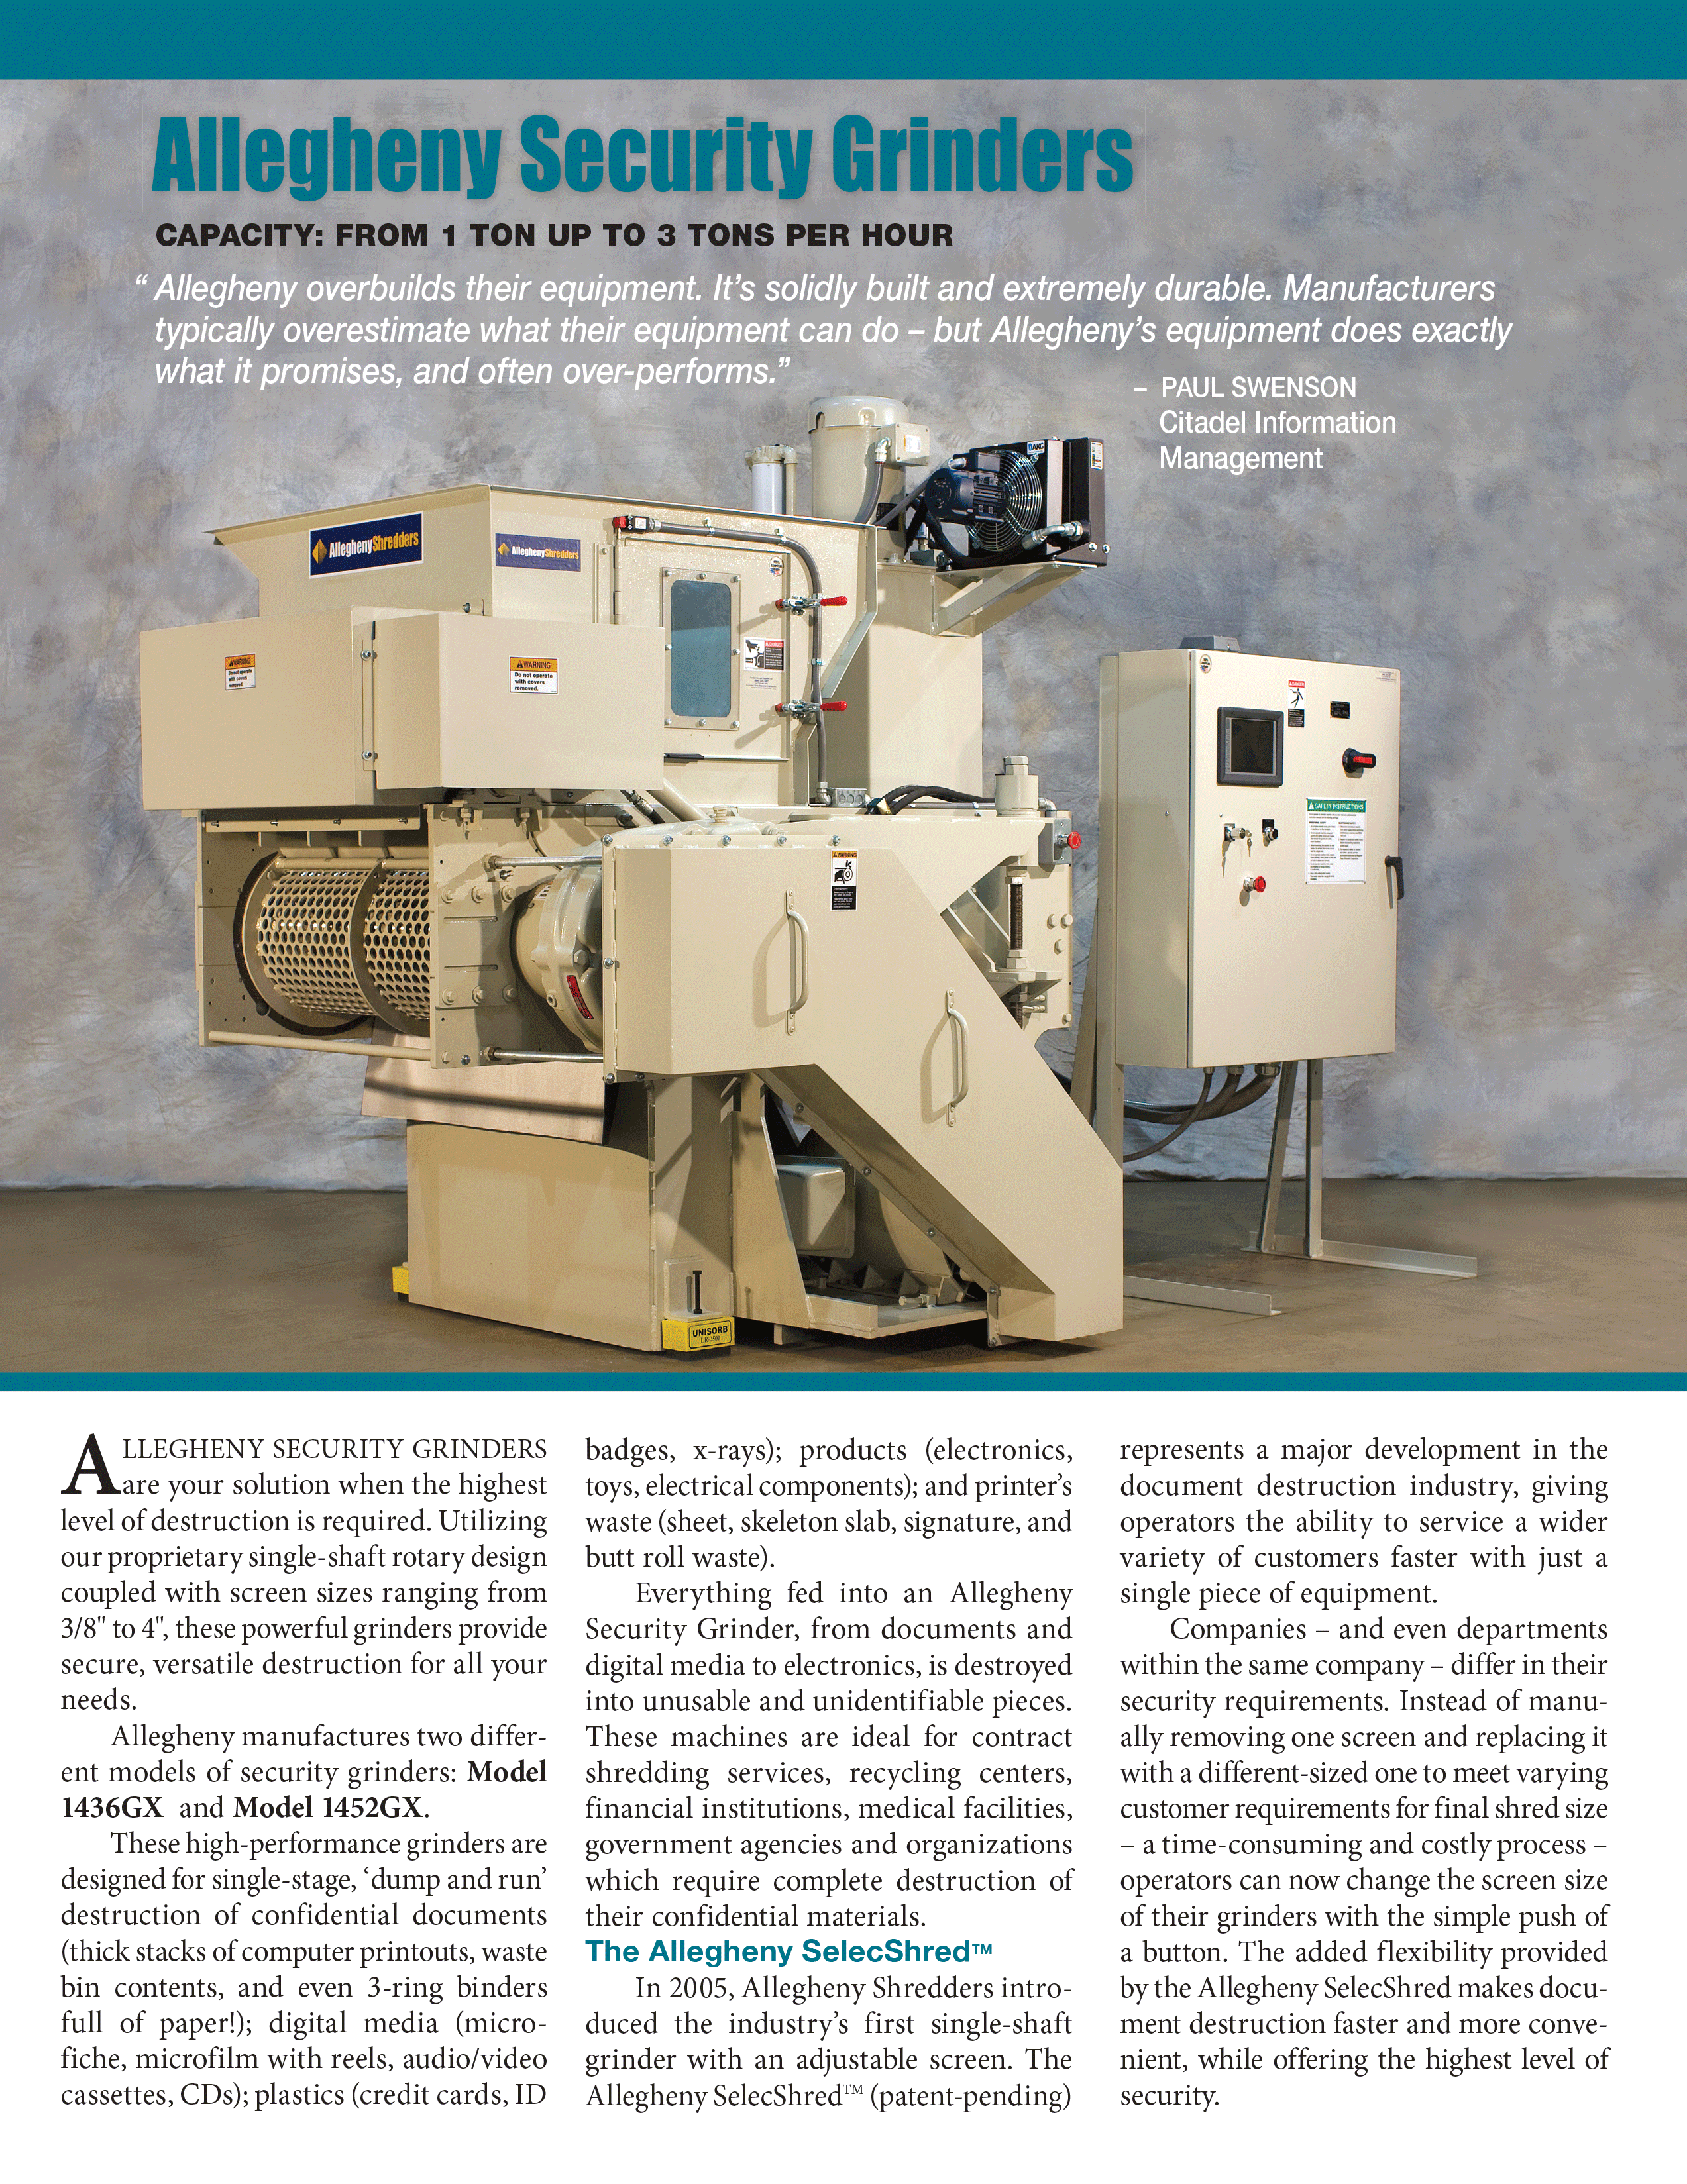 Learn more about Security Grinders in the Allegheny Brochure.